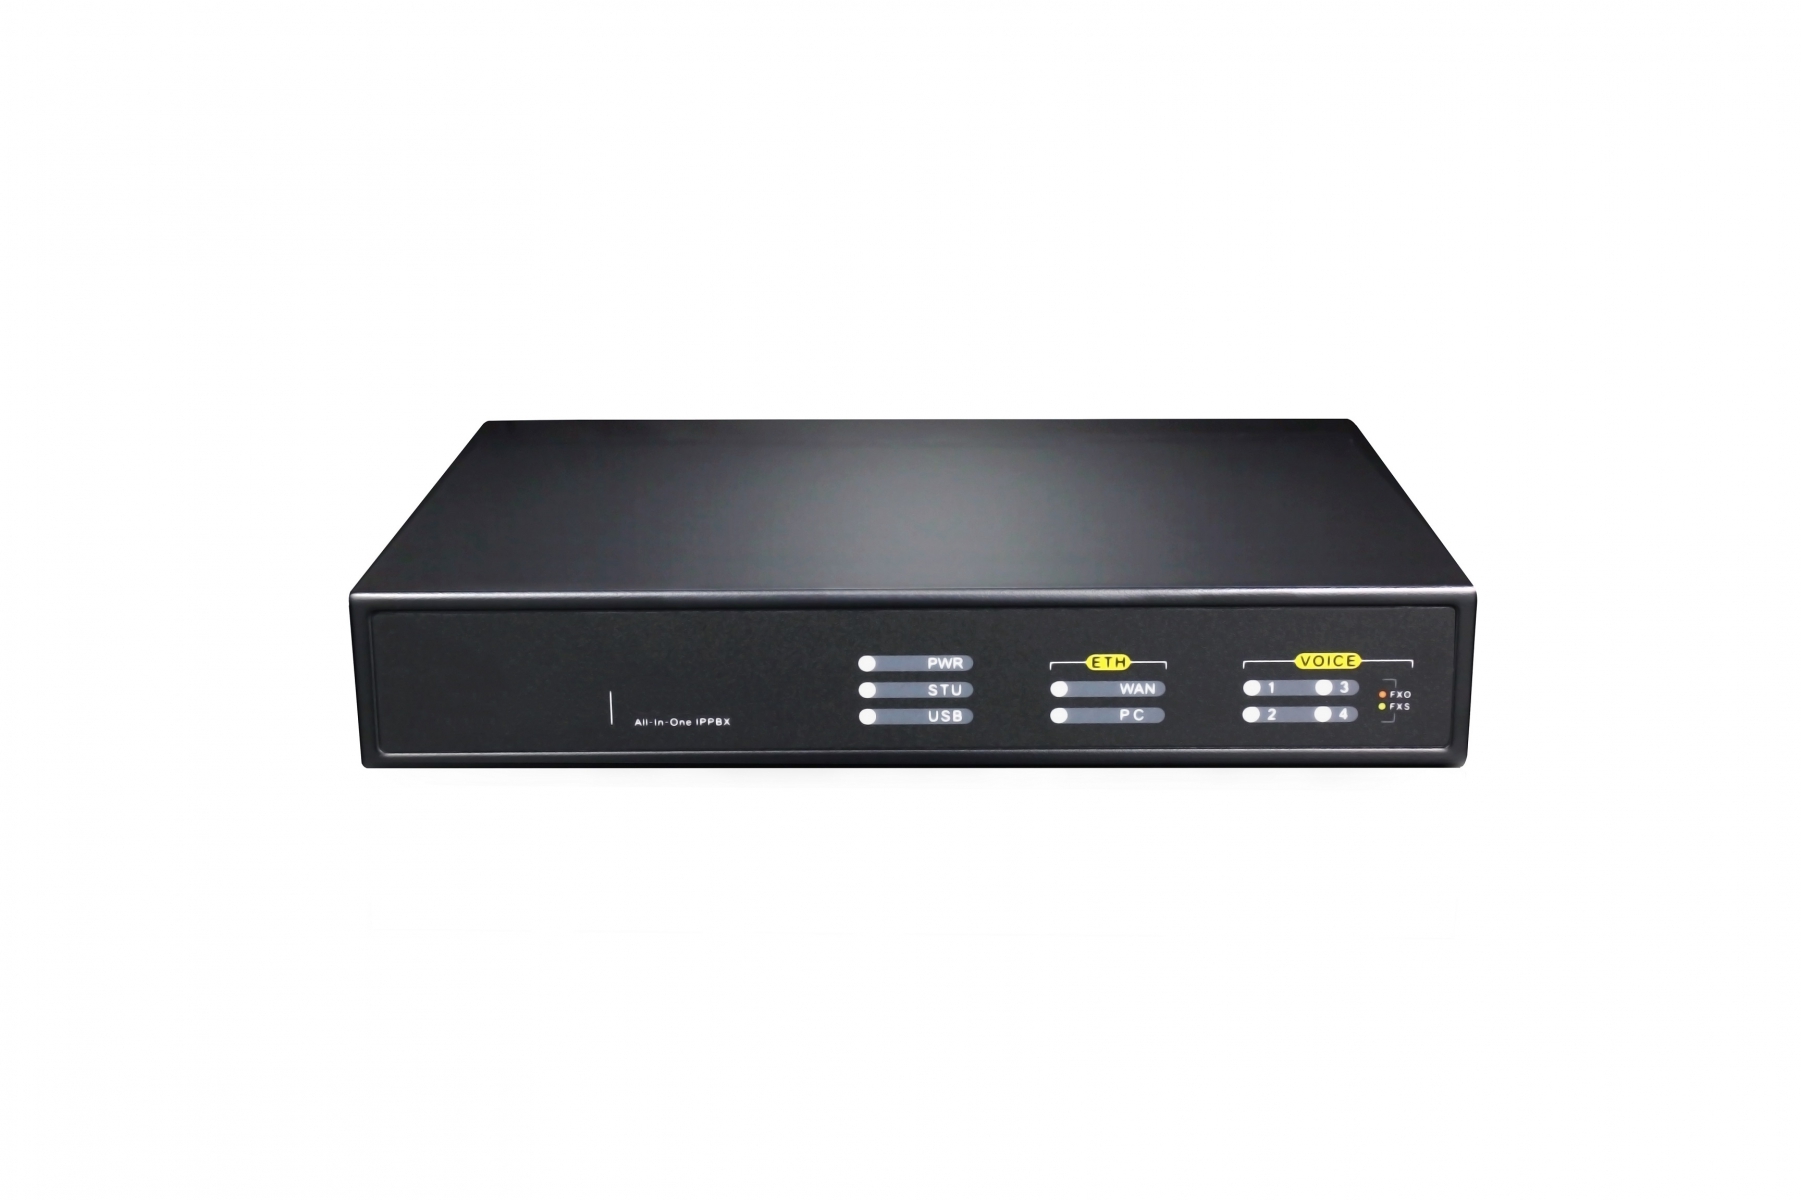 RT20 All-in-One IP PBX Telephony System with 4 FXS/FXO Ports, Support 20 SIP Users and 24 SIP trunks